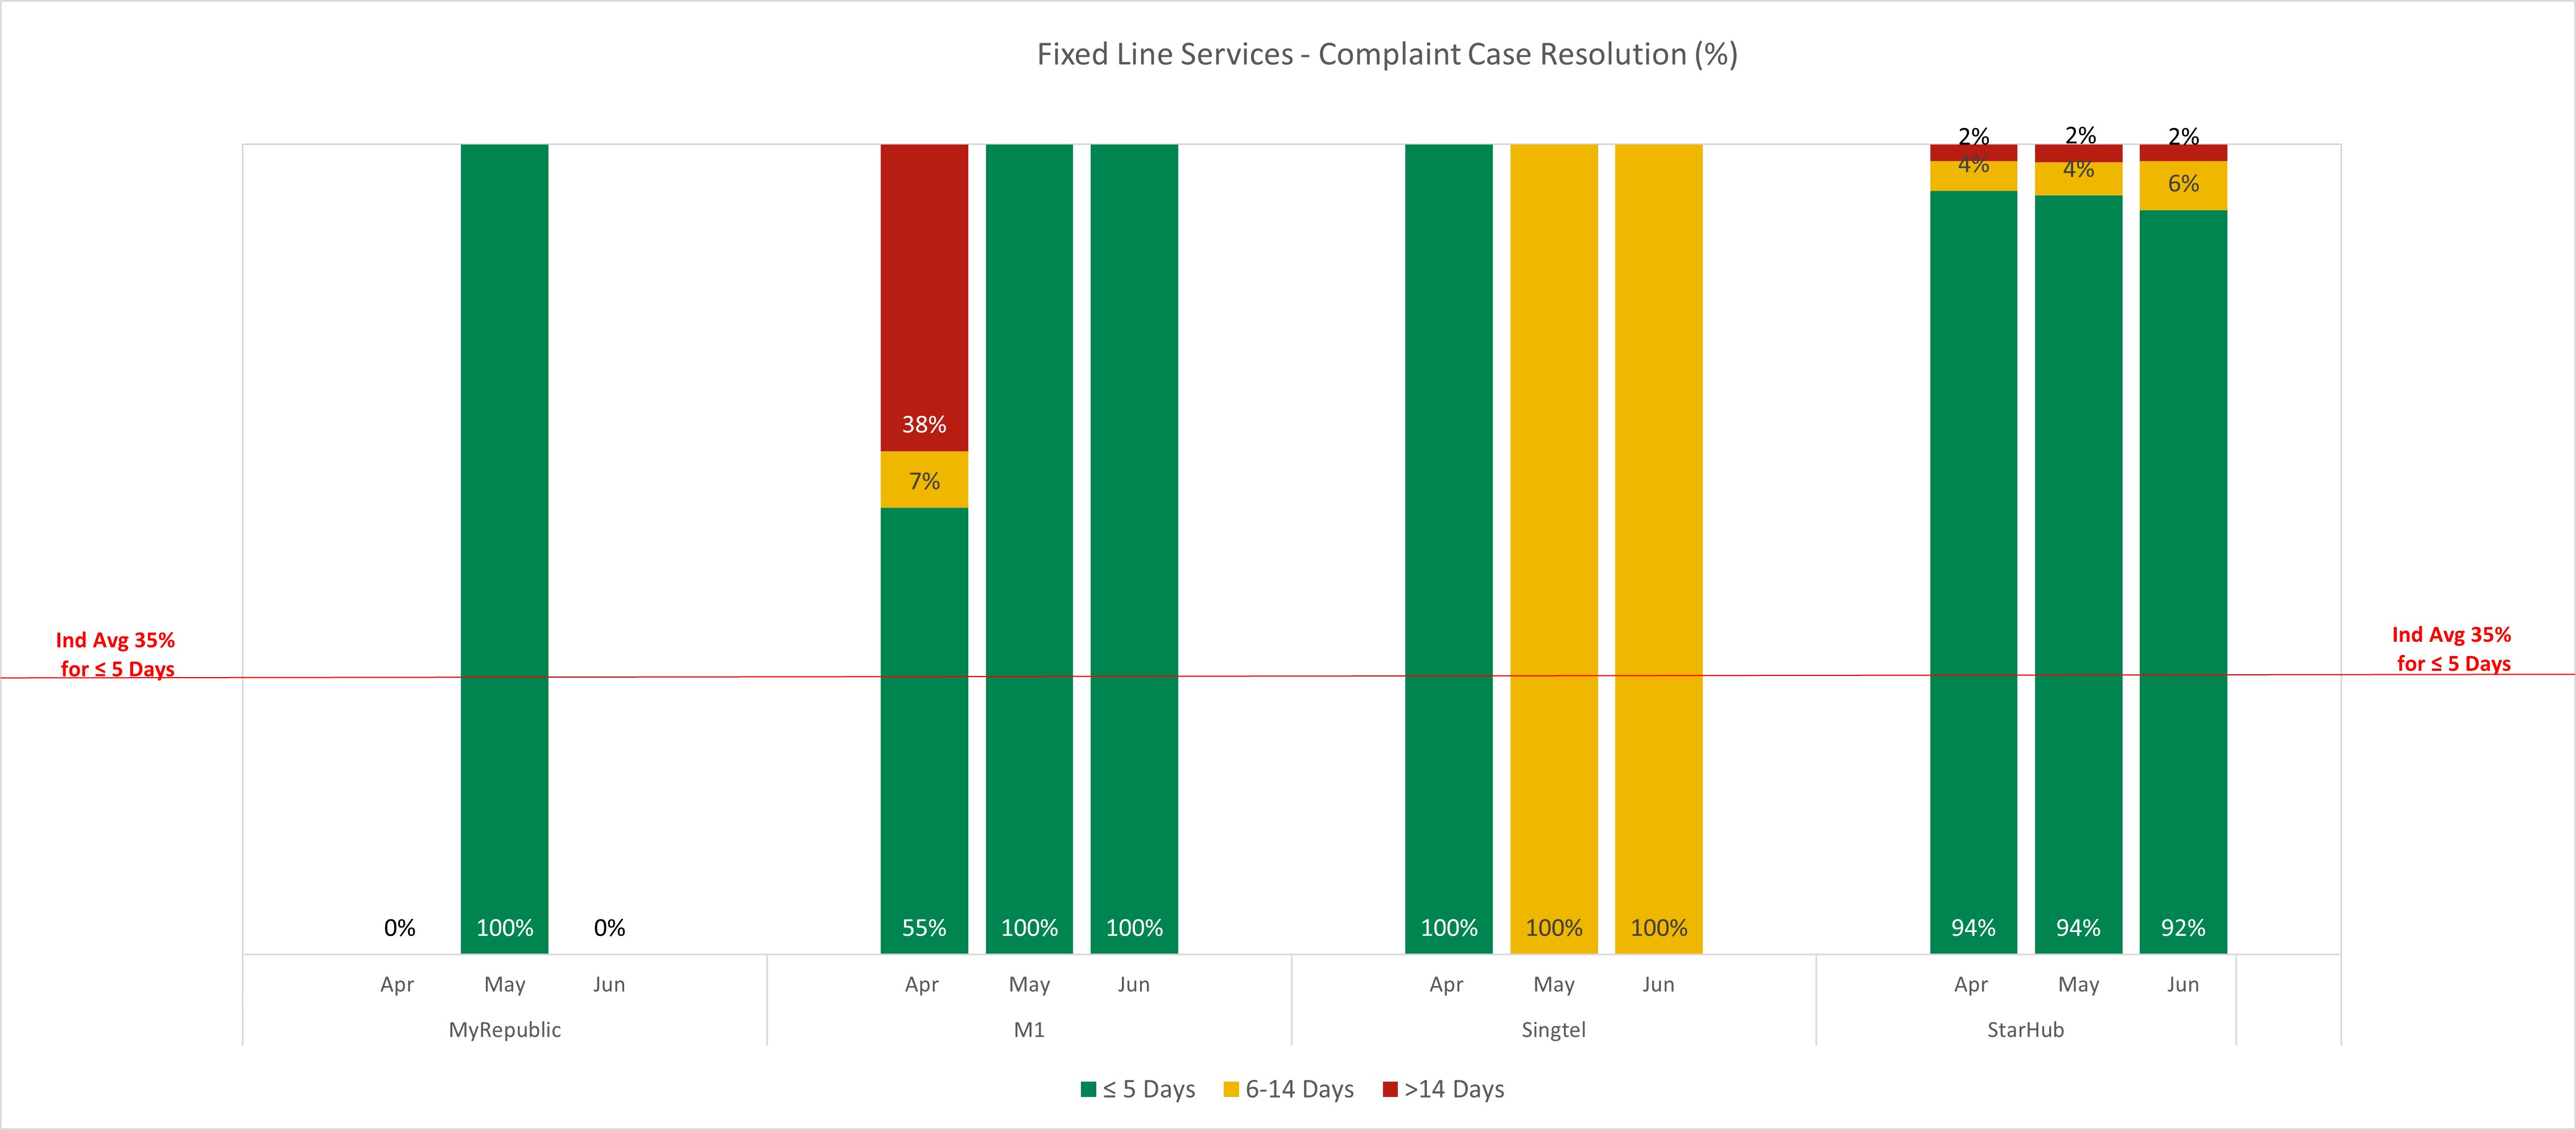 Fixed Line Services - Complaint Case Resolution